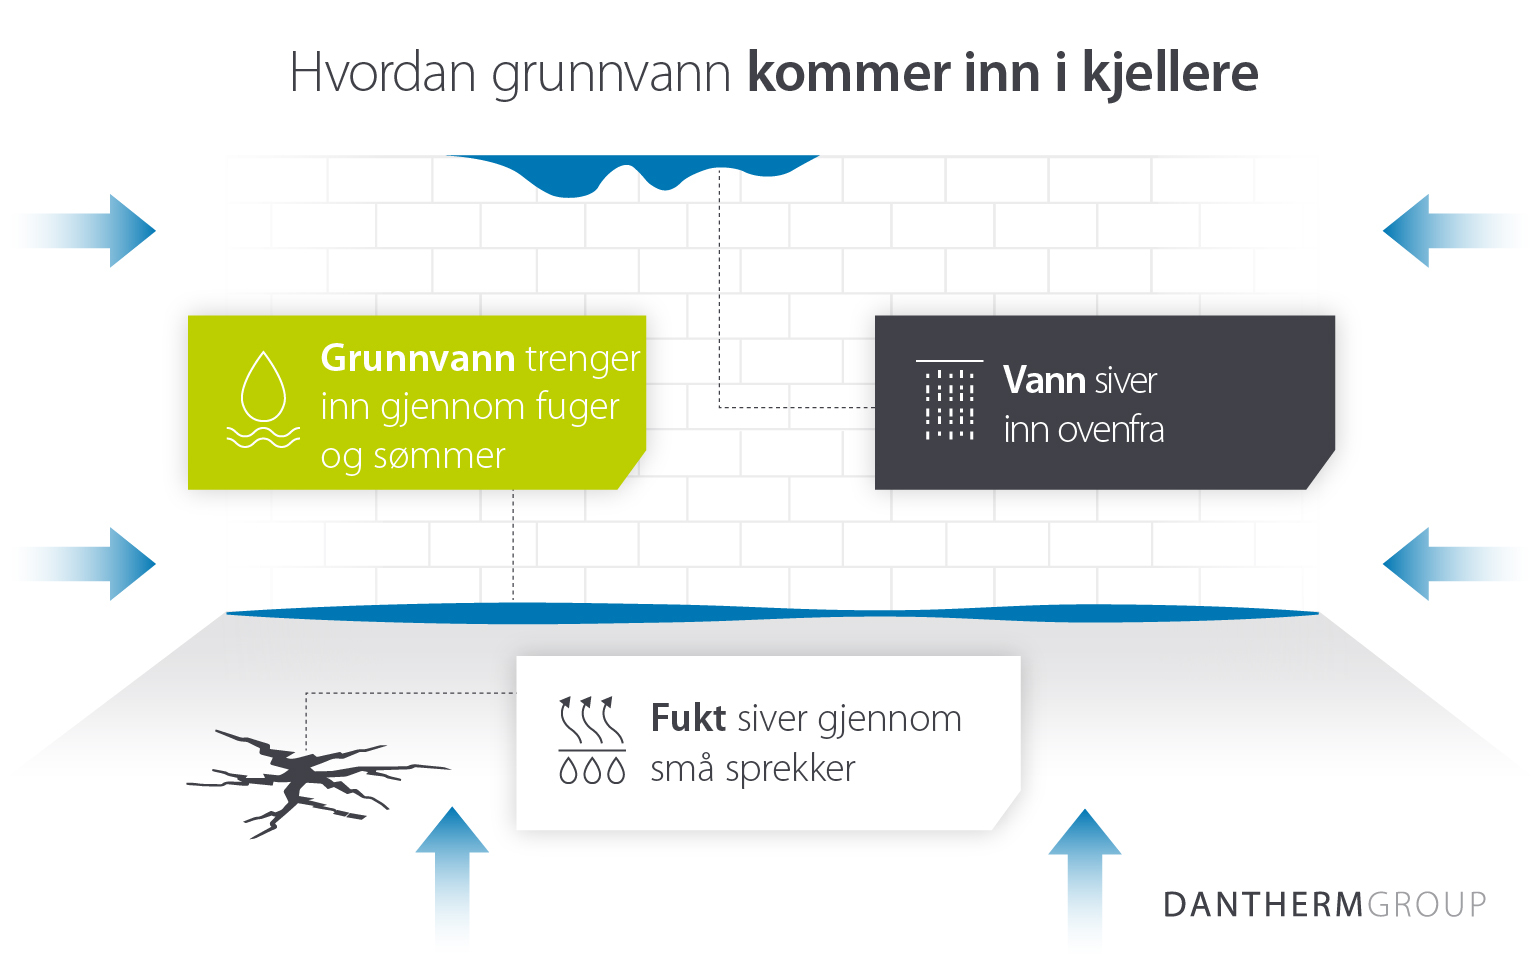 Infographic demonstrating how groundwater infiltrates basements in buildings to cause damp